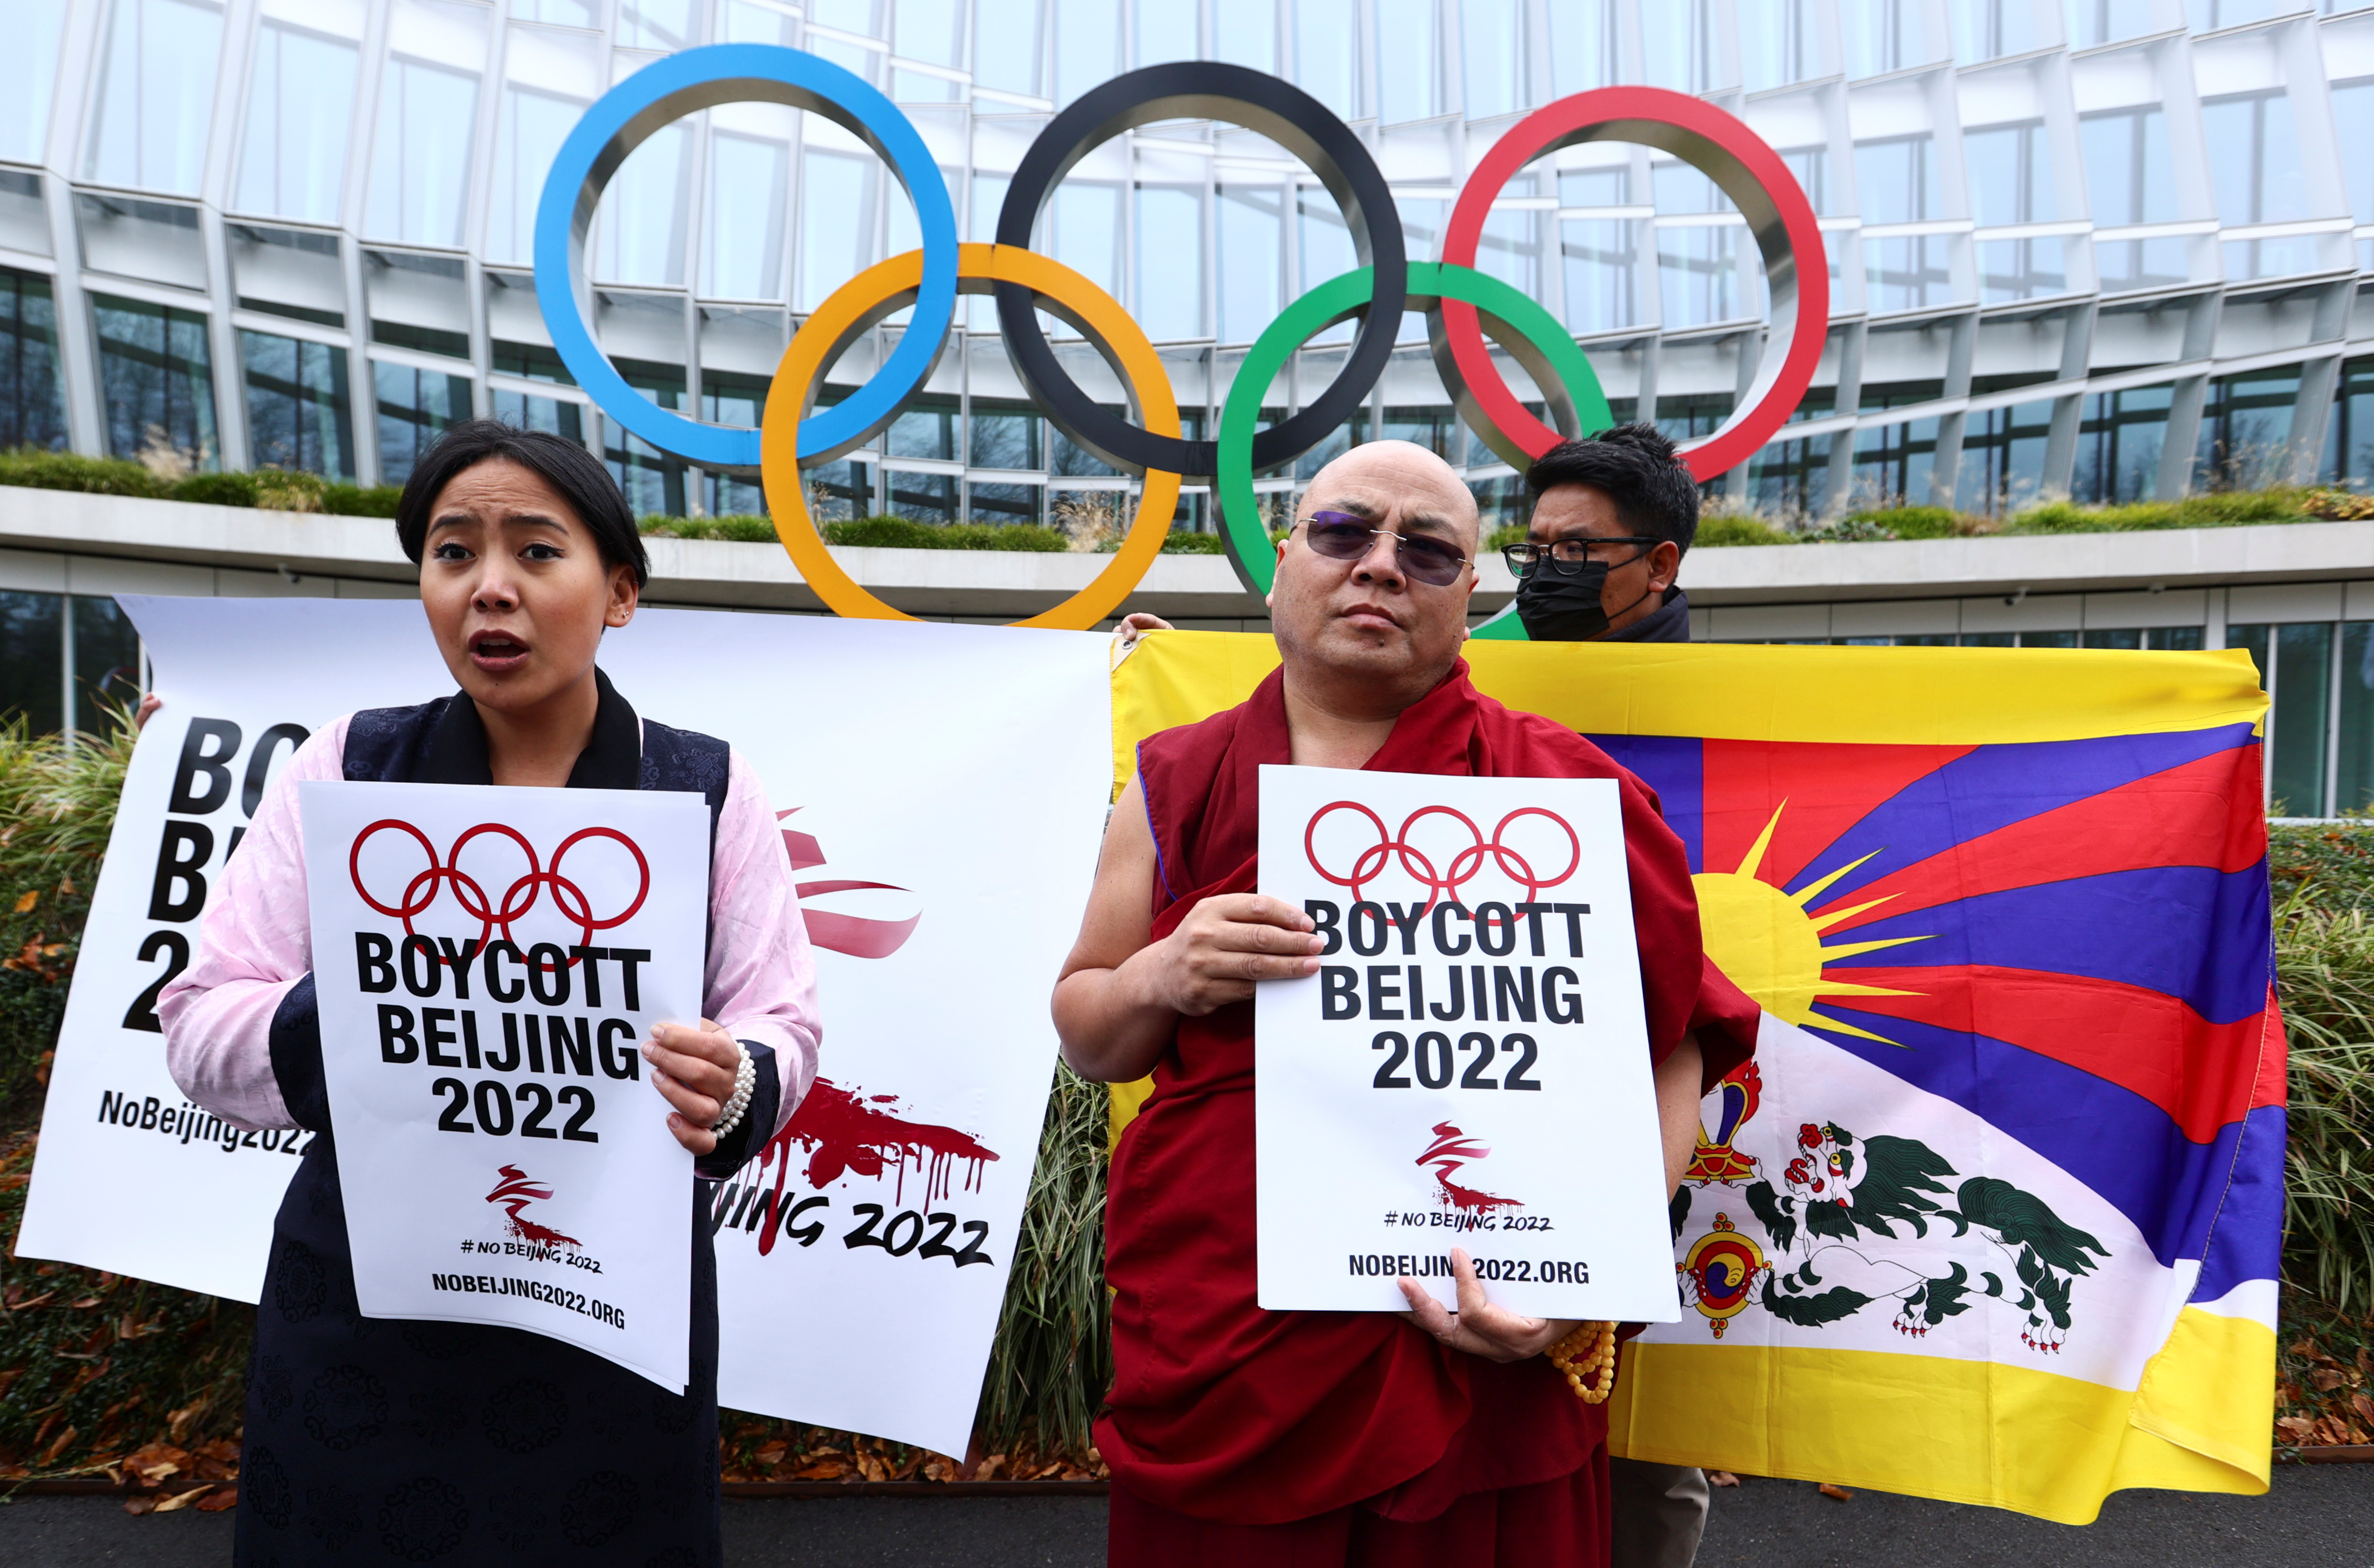 Chemi Lhamo and Golog Jigme Gyatso join protesters for a mock funeral outside the International Olympic Committee (IOC) headquarters as part of the No Beijing 2022 campaign, a coalition of over 180 rights groups that are calling for a boycott of Beijing 2022, in Lausanne, Switzerland November 26, 2021. REUTERS/Denis Balibouse